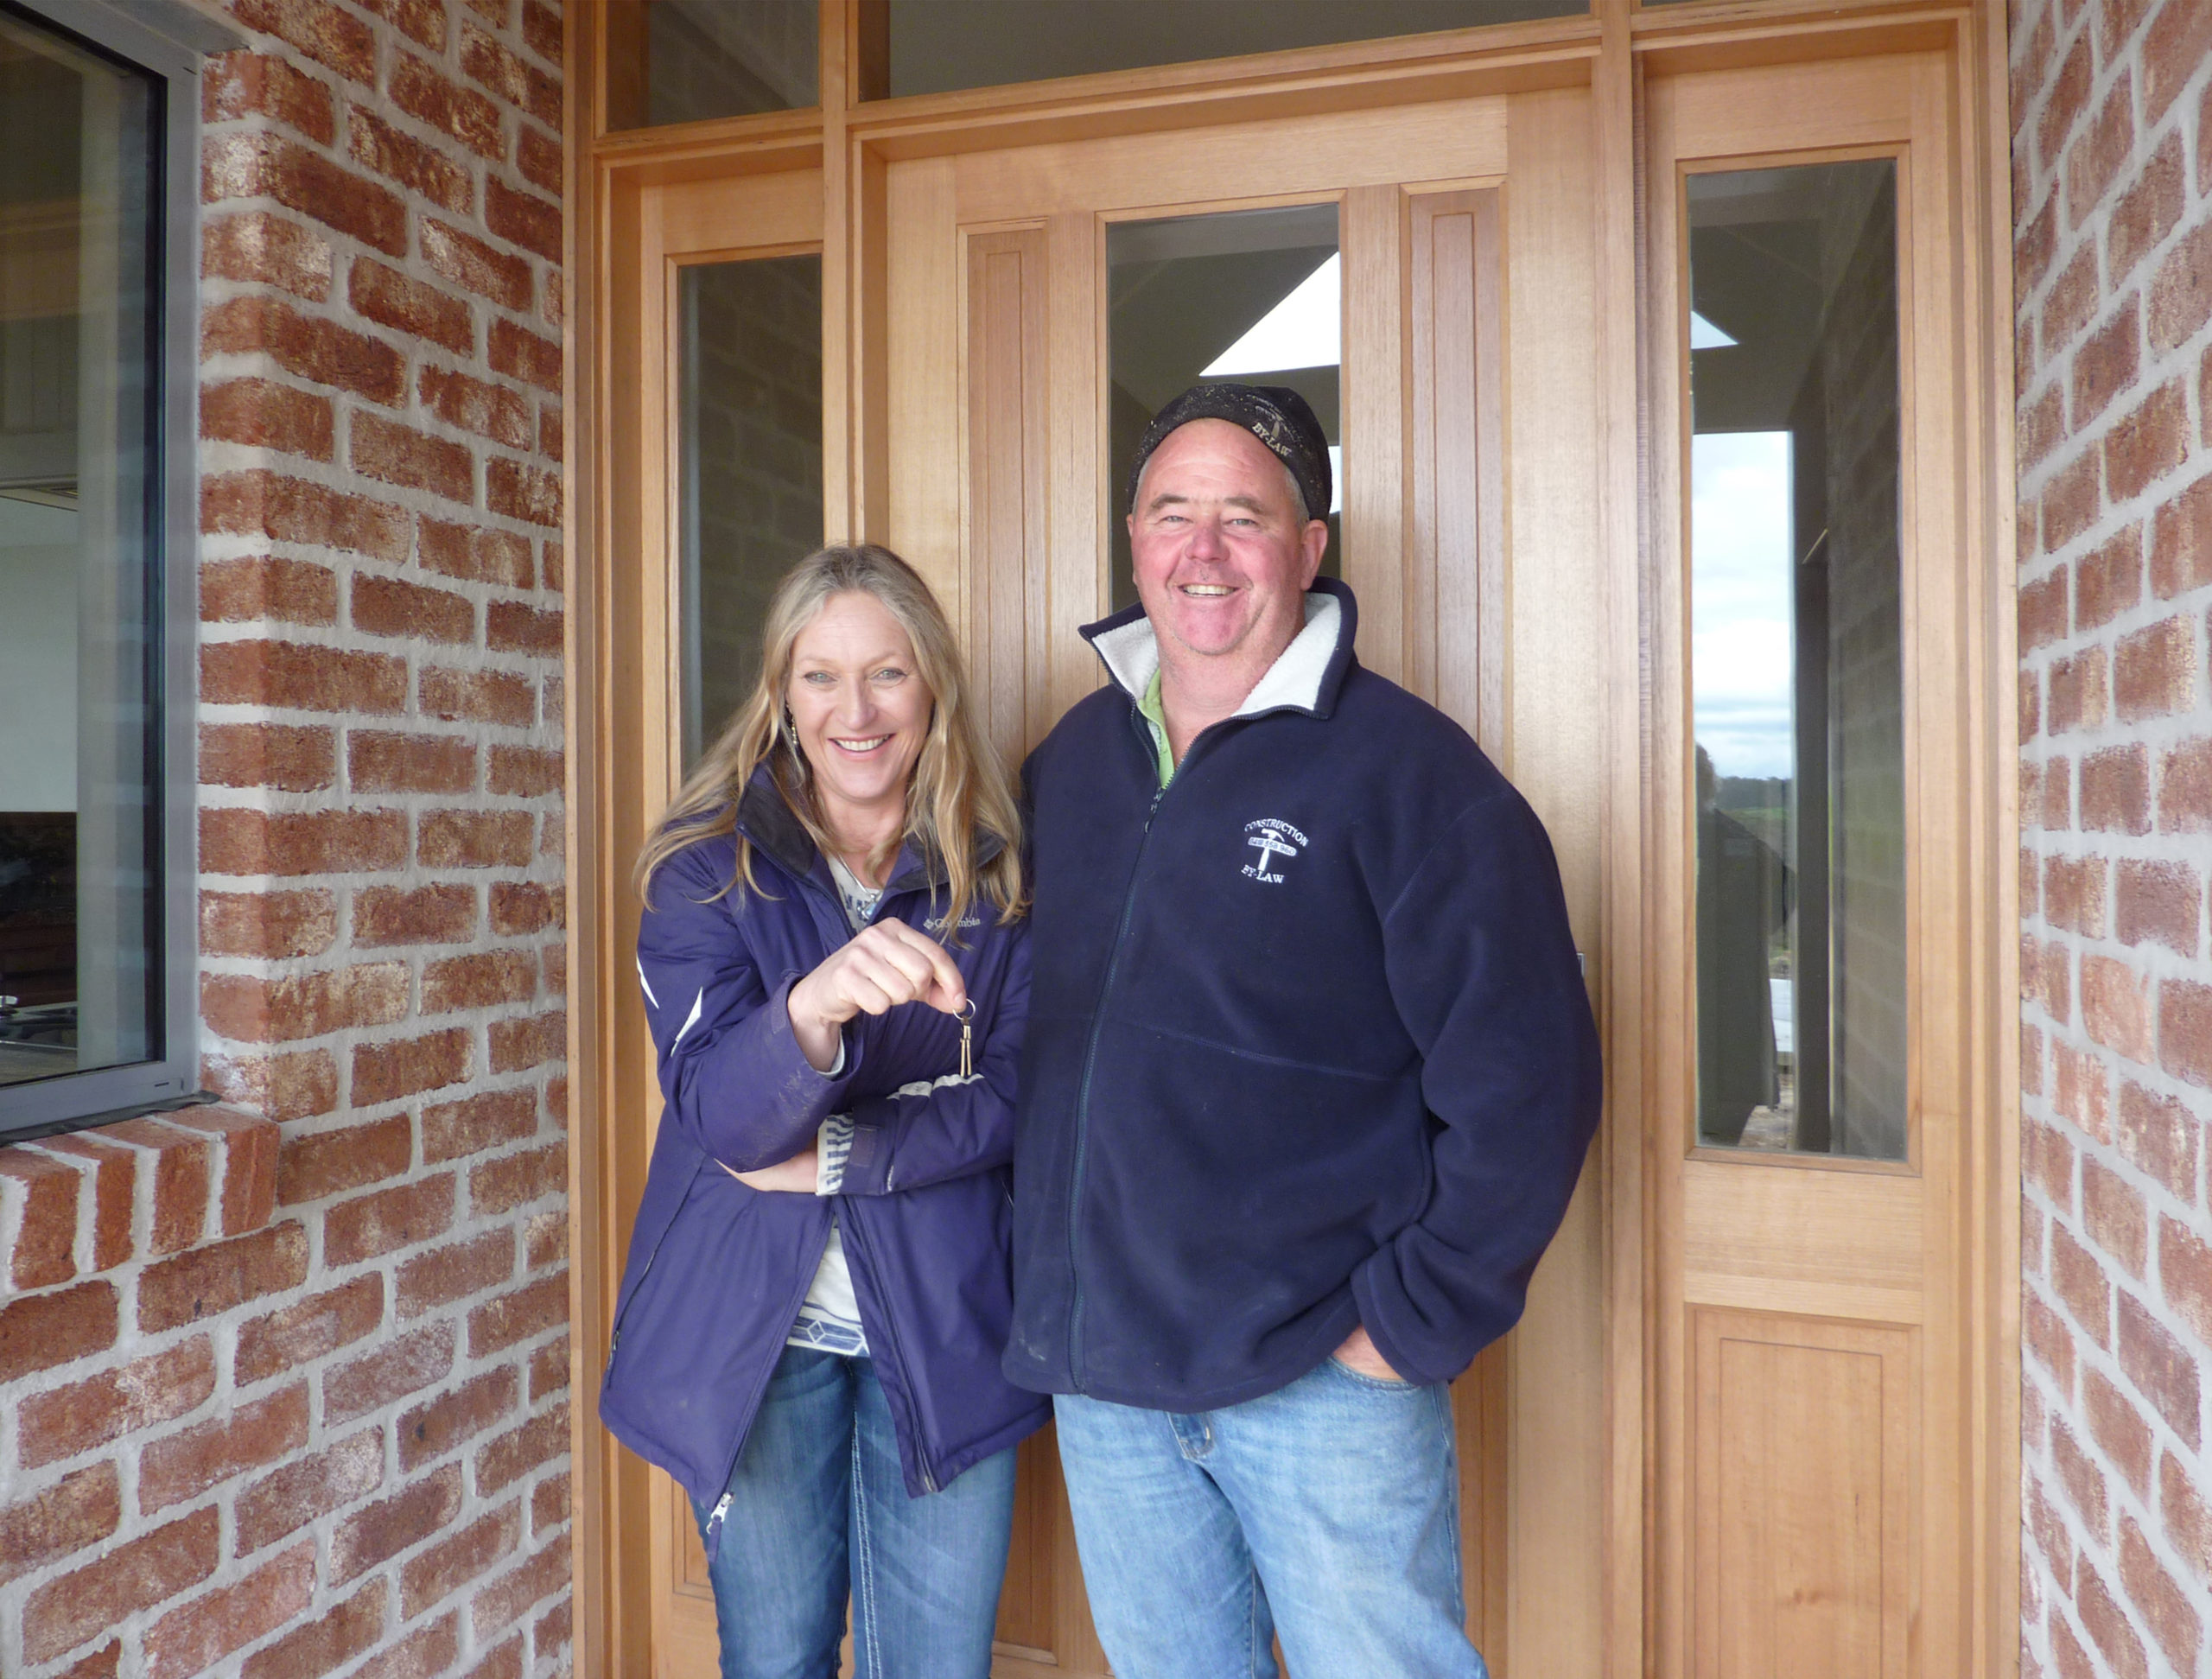 The Home owner Silvia, standing outside the front door with Doug the builder during handover of the property